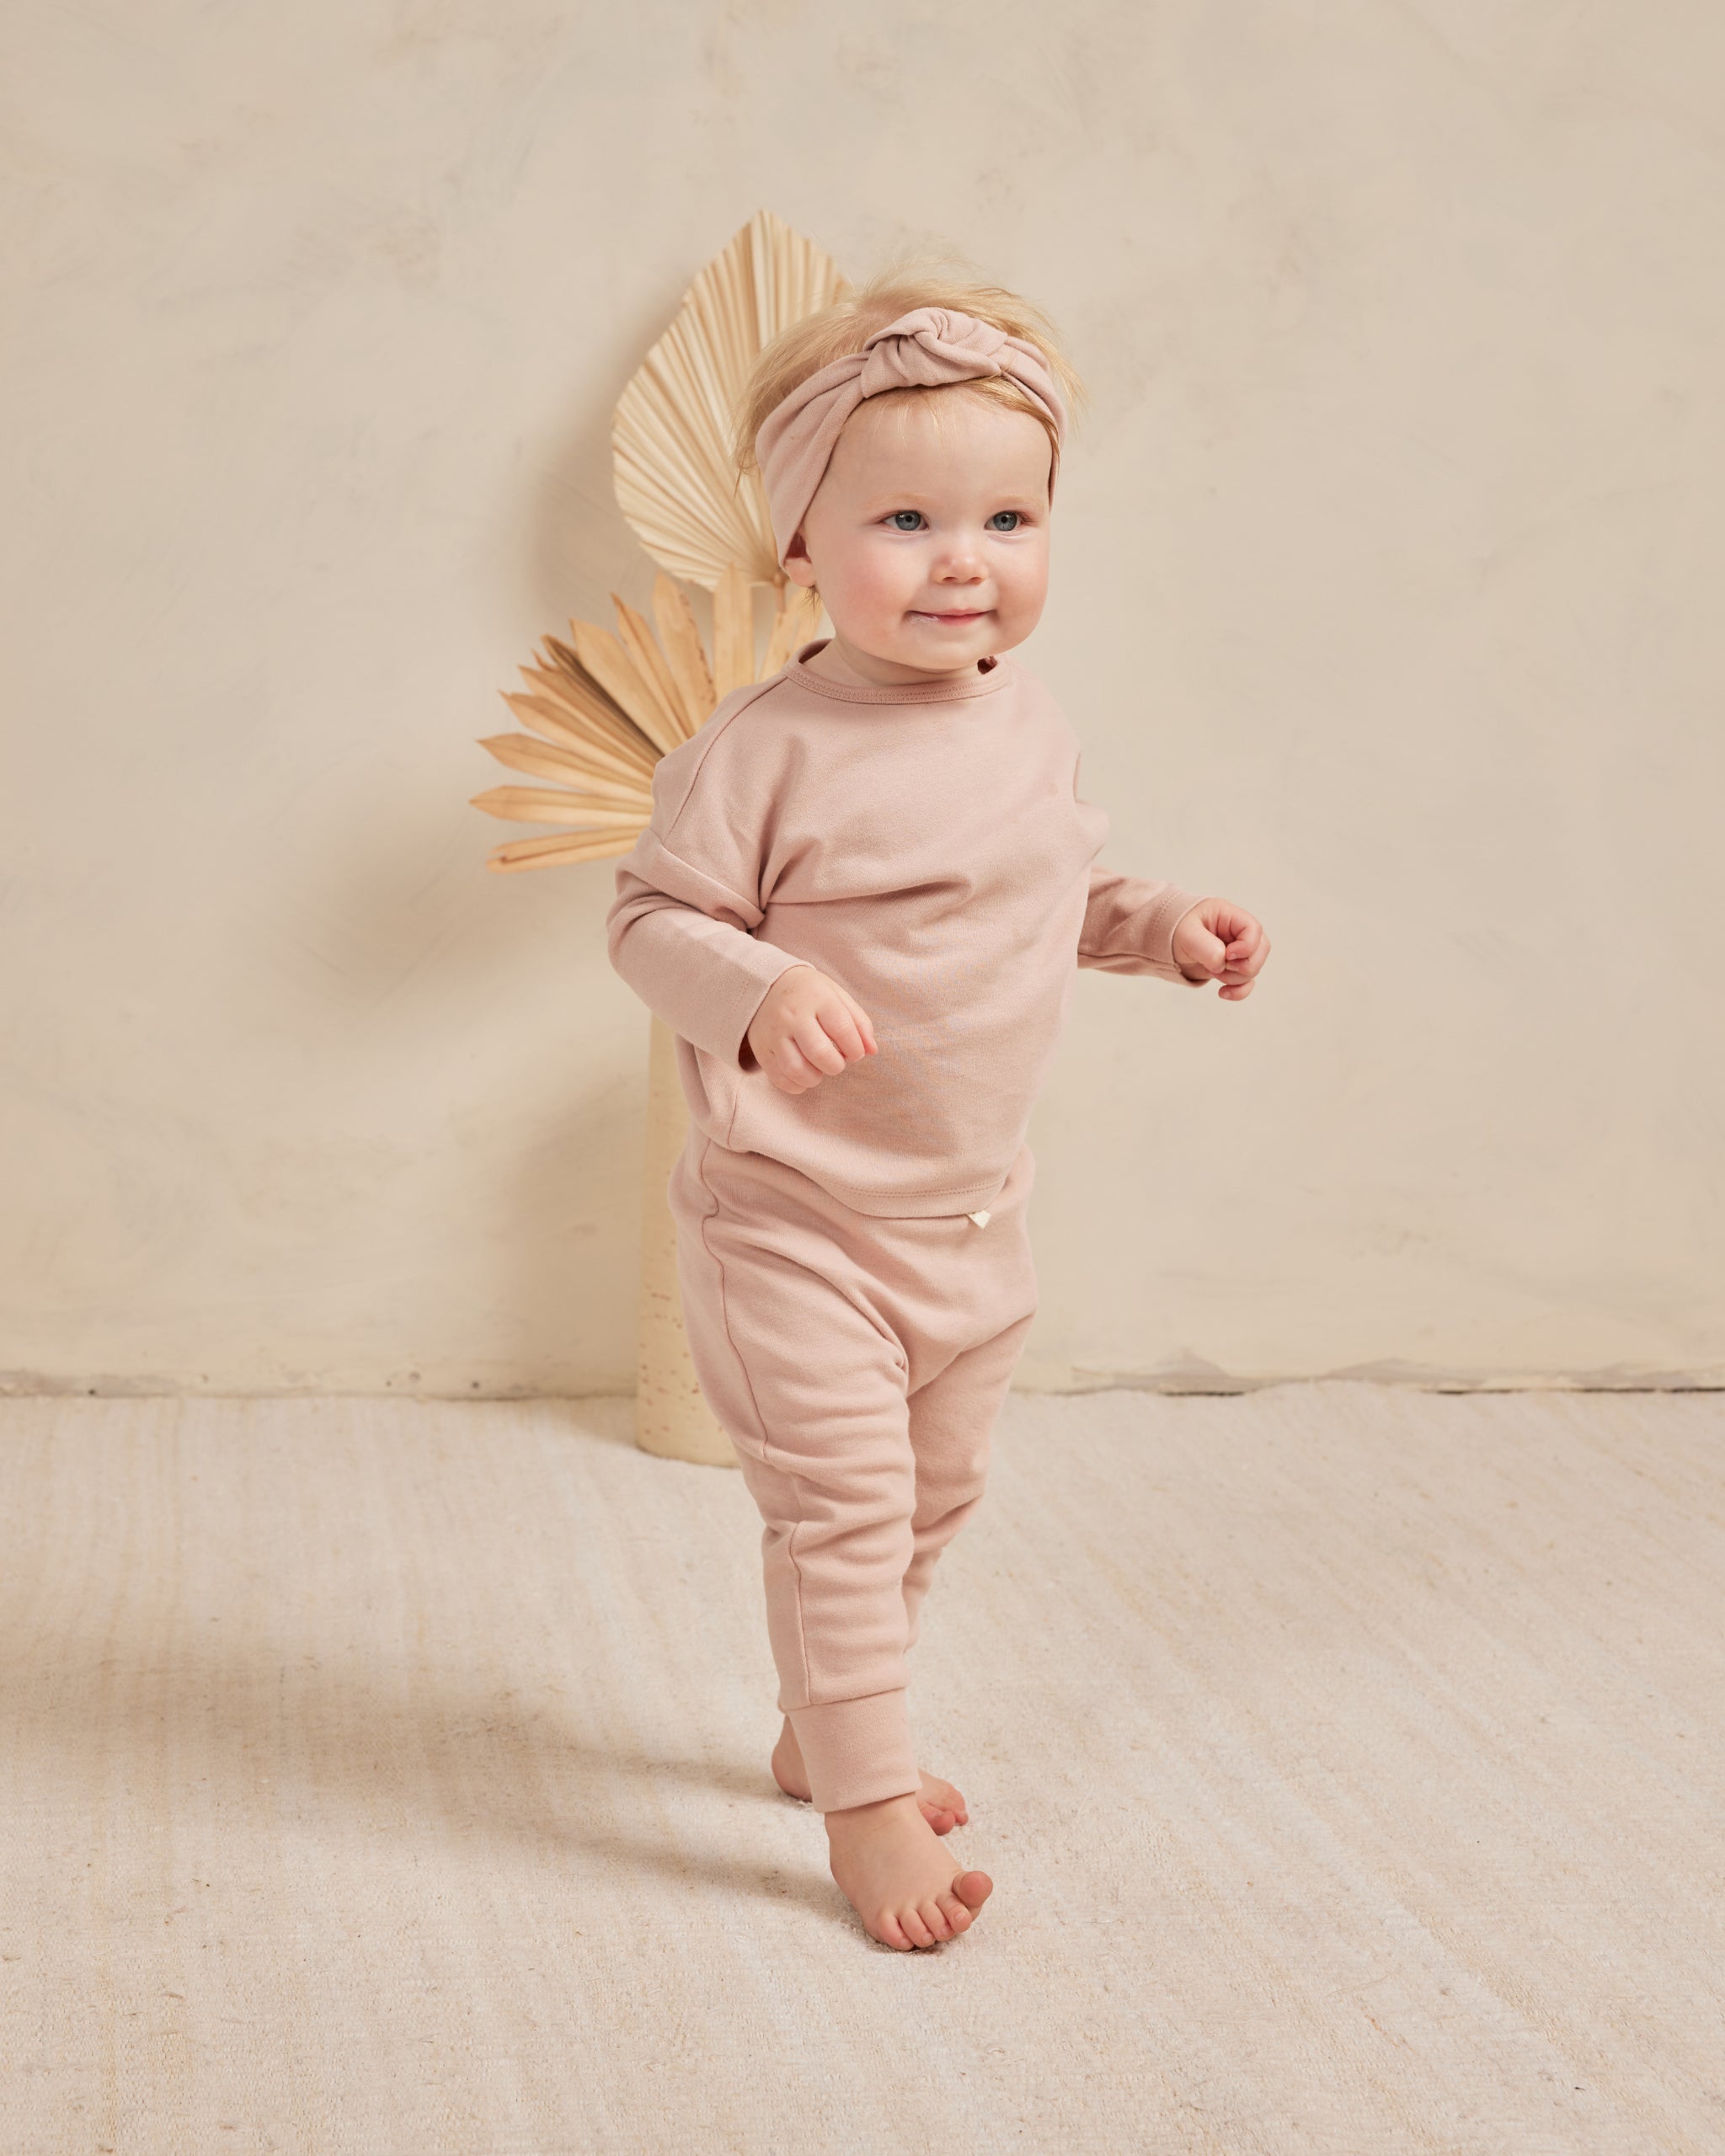 Long Sleeve Tee || Blush - Rylee + Cru | Kids Clothes | Trendy Baby Clothes | Modern Infant Outfits |